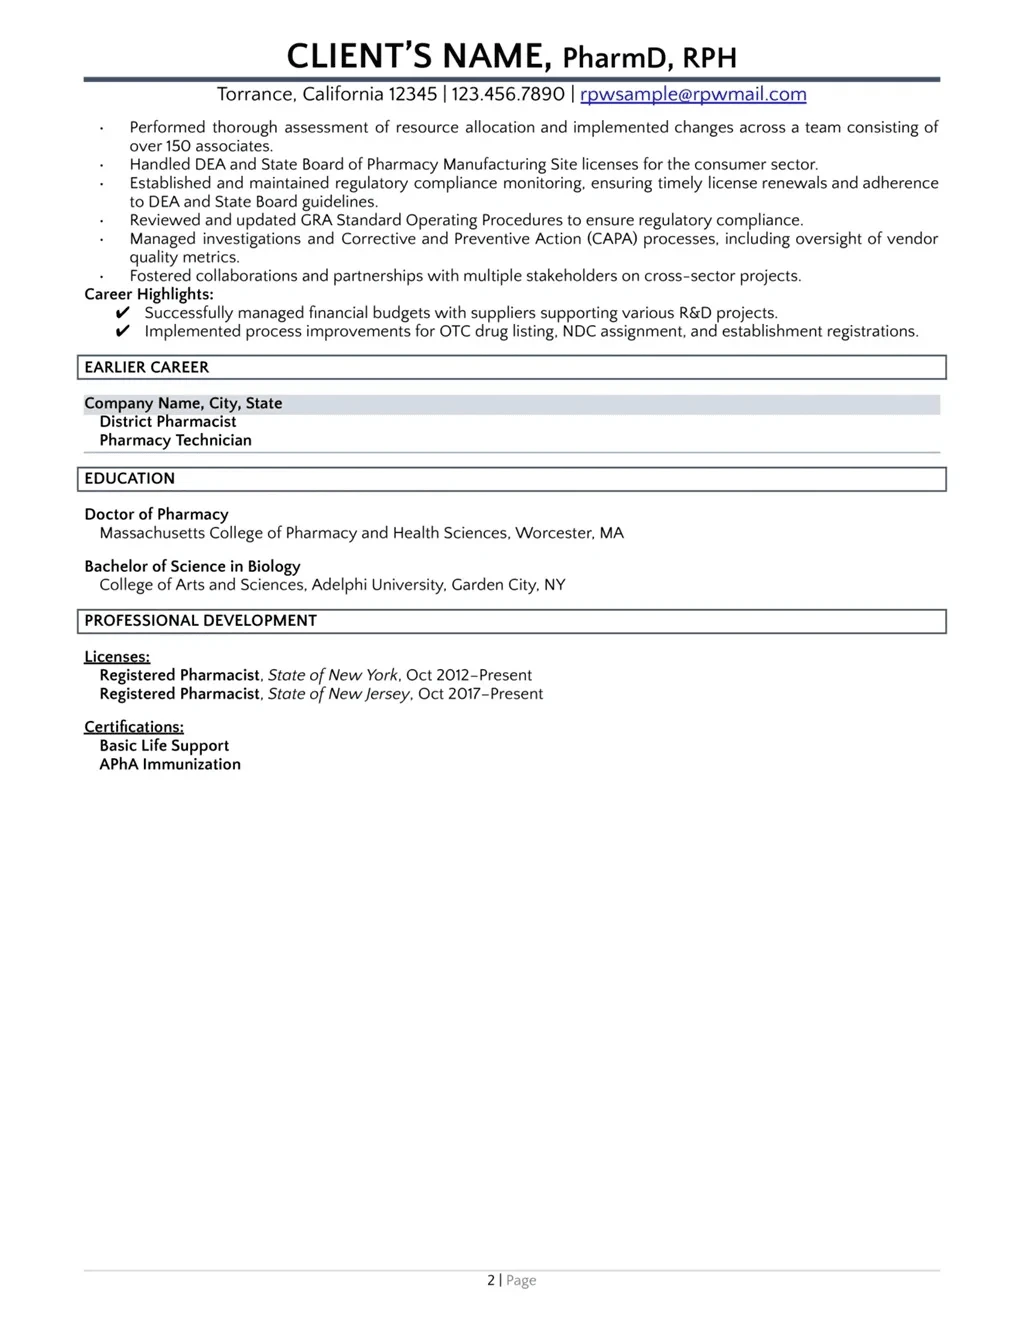 Pharmaceutical Resume Example Page Two